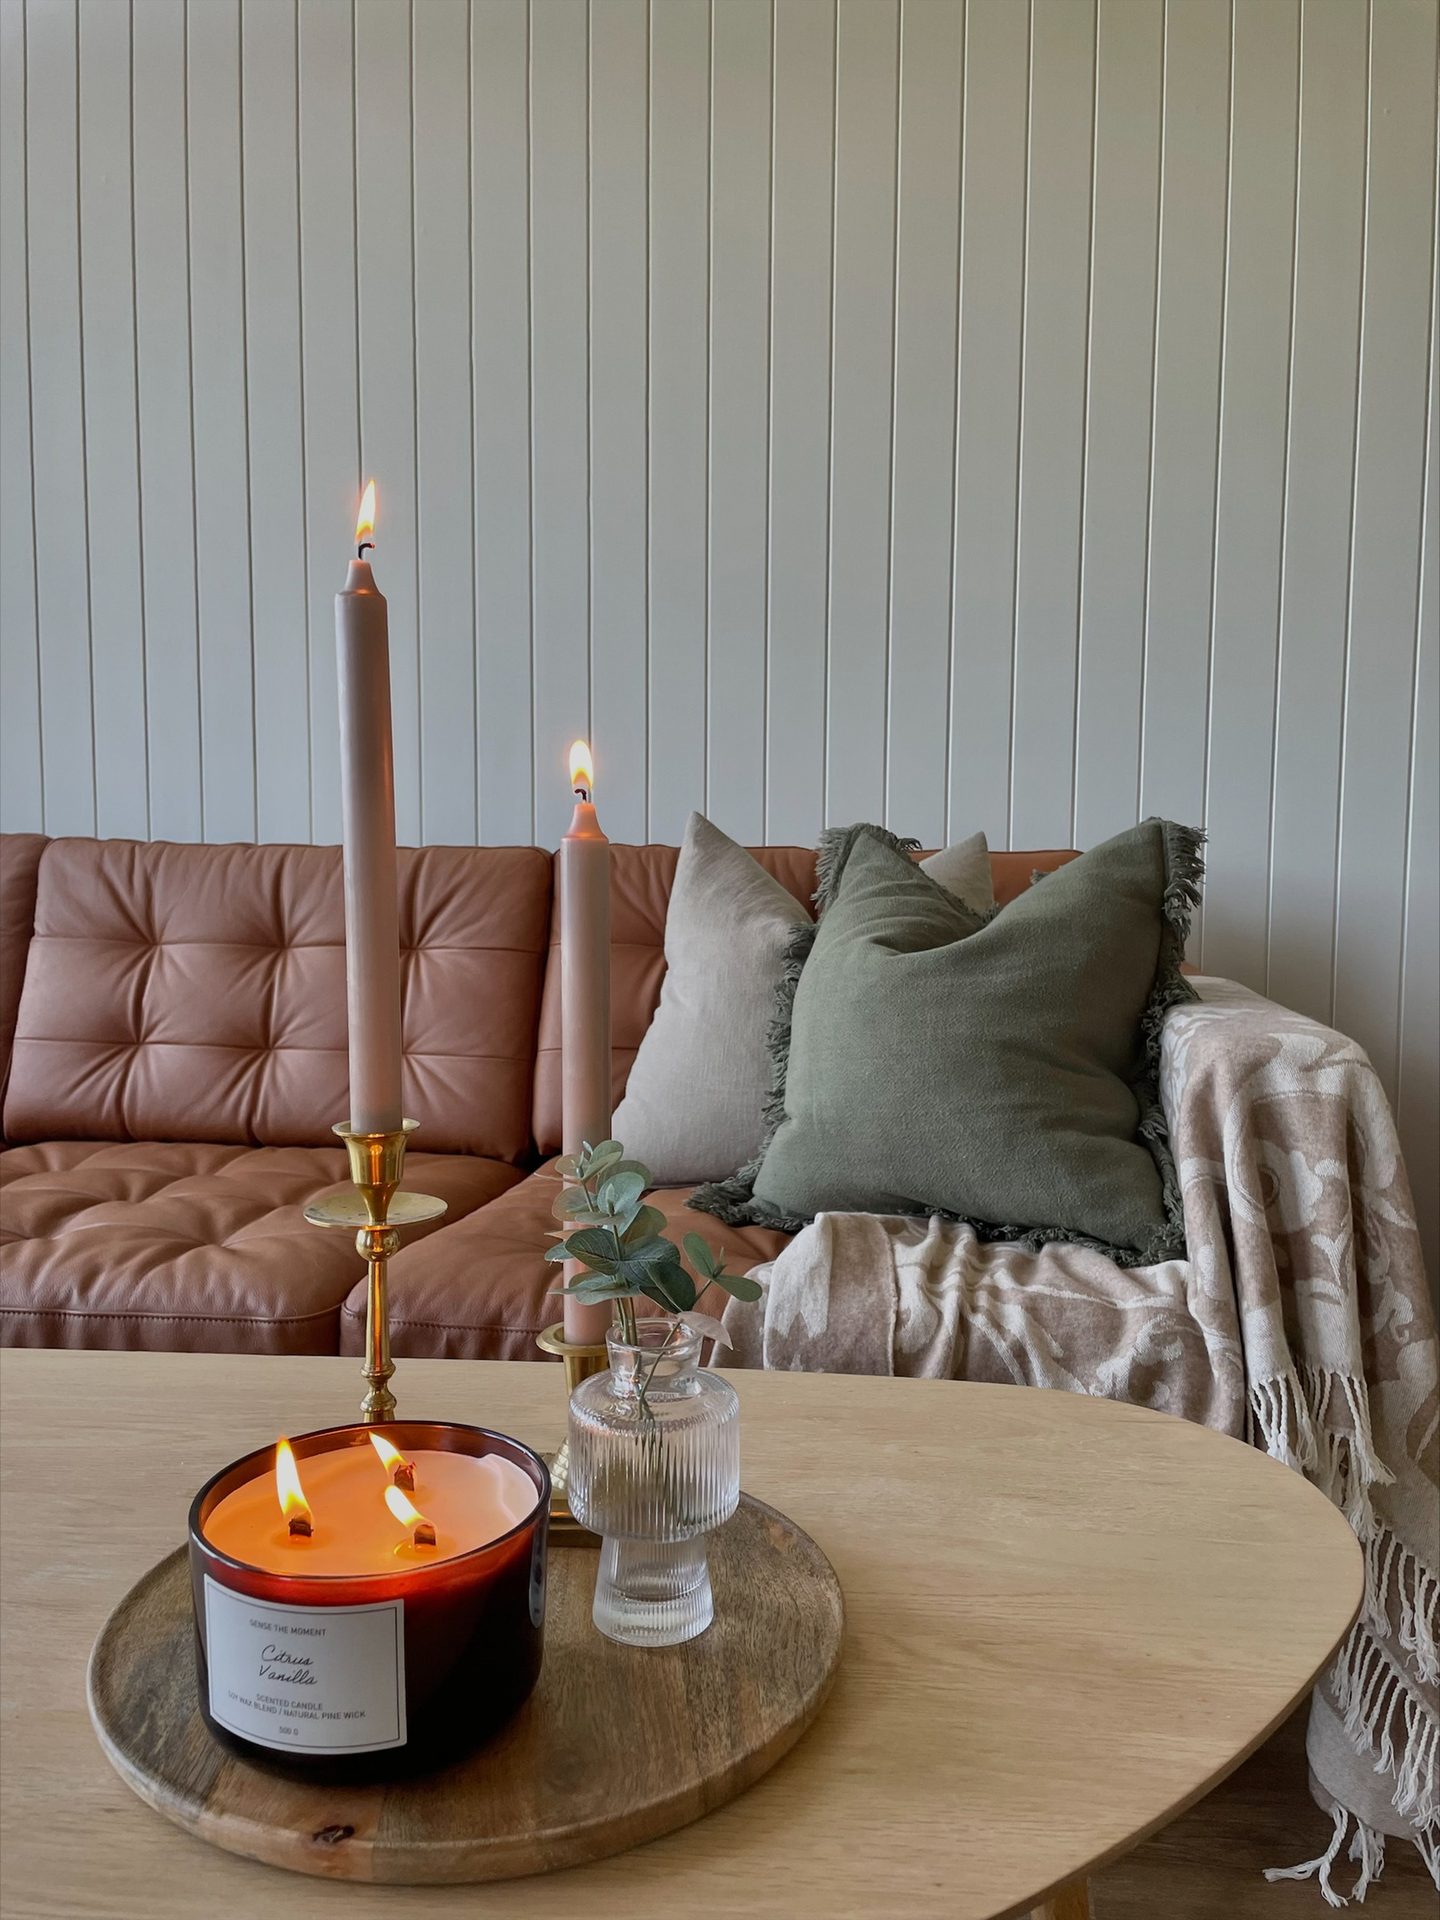 Interior design, Table, Furniture, Couch, Candle, Rectangle, Wood, Lighting, Comfort, Orange